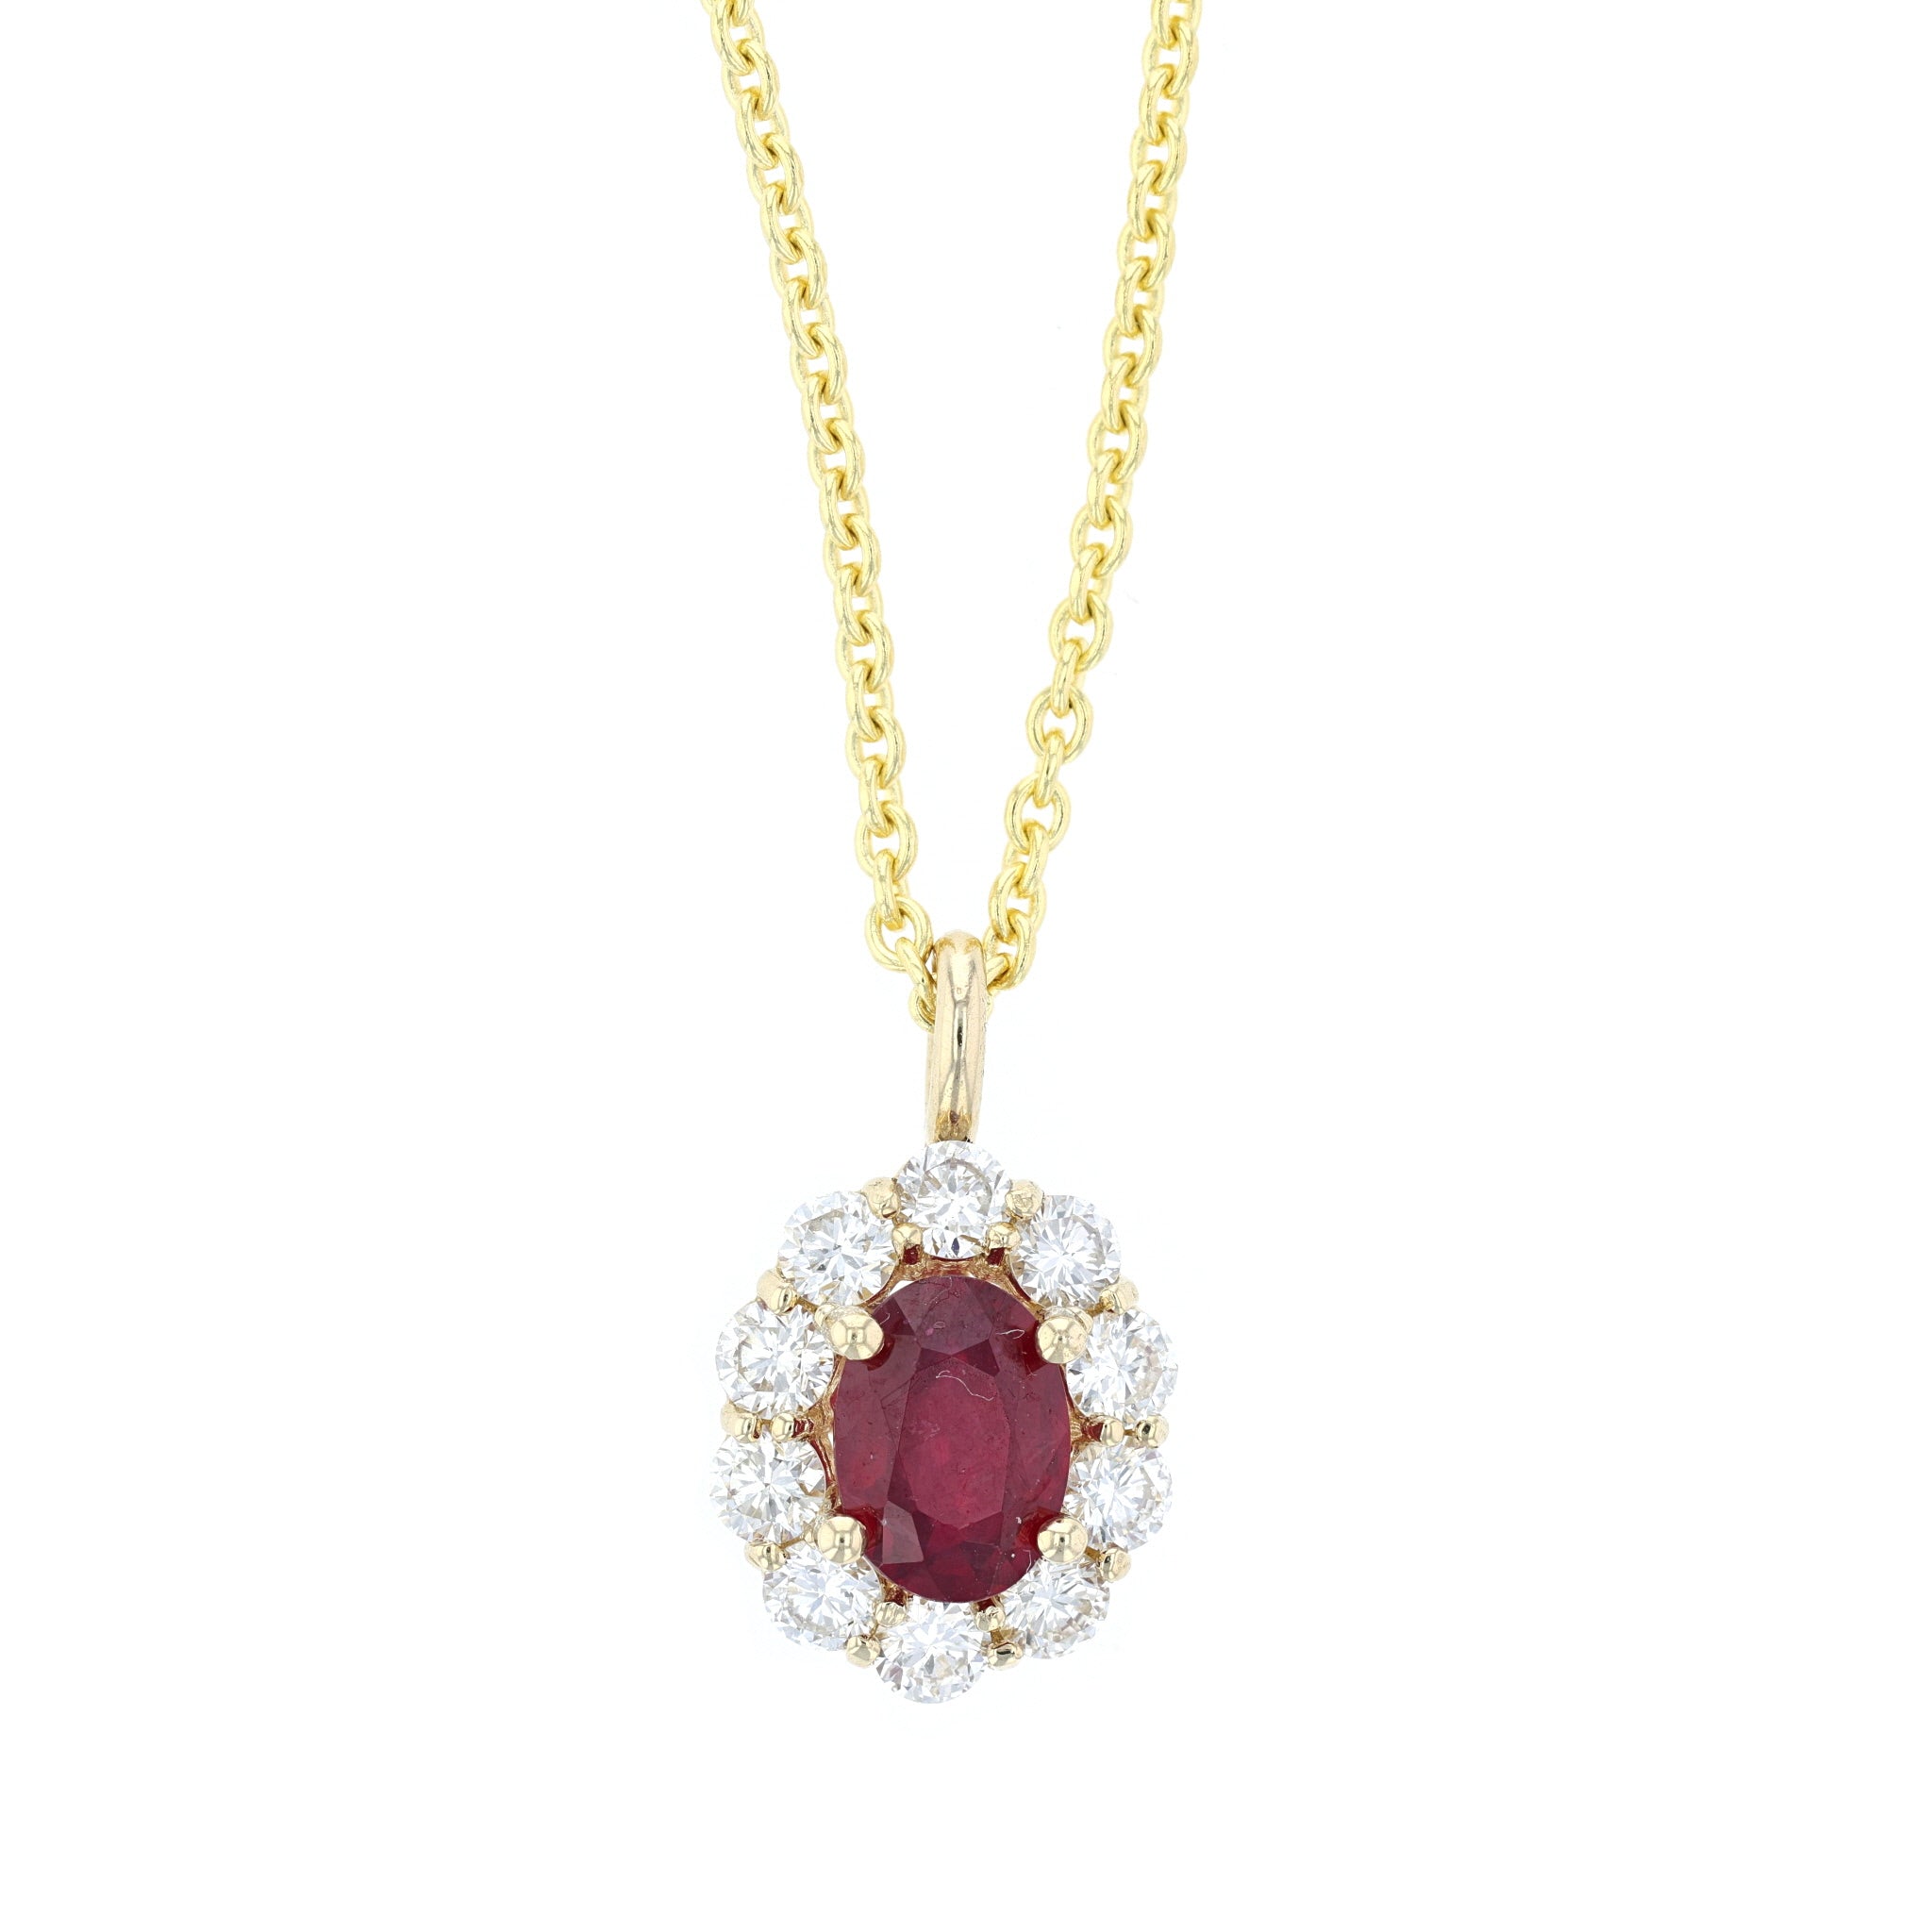 Ruby and Diamond Halo Pendant Necklace in 14k Yellow Gold